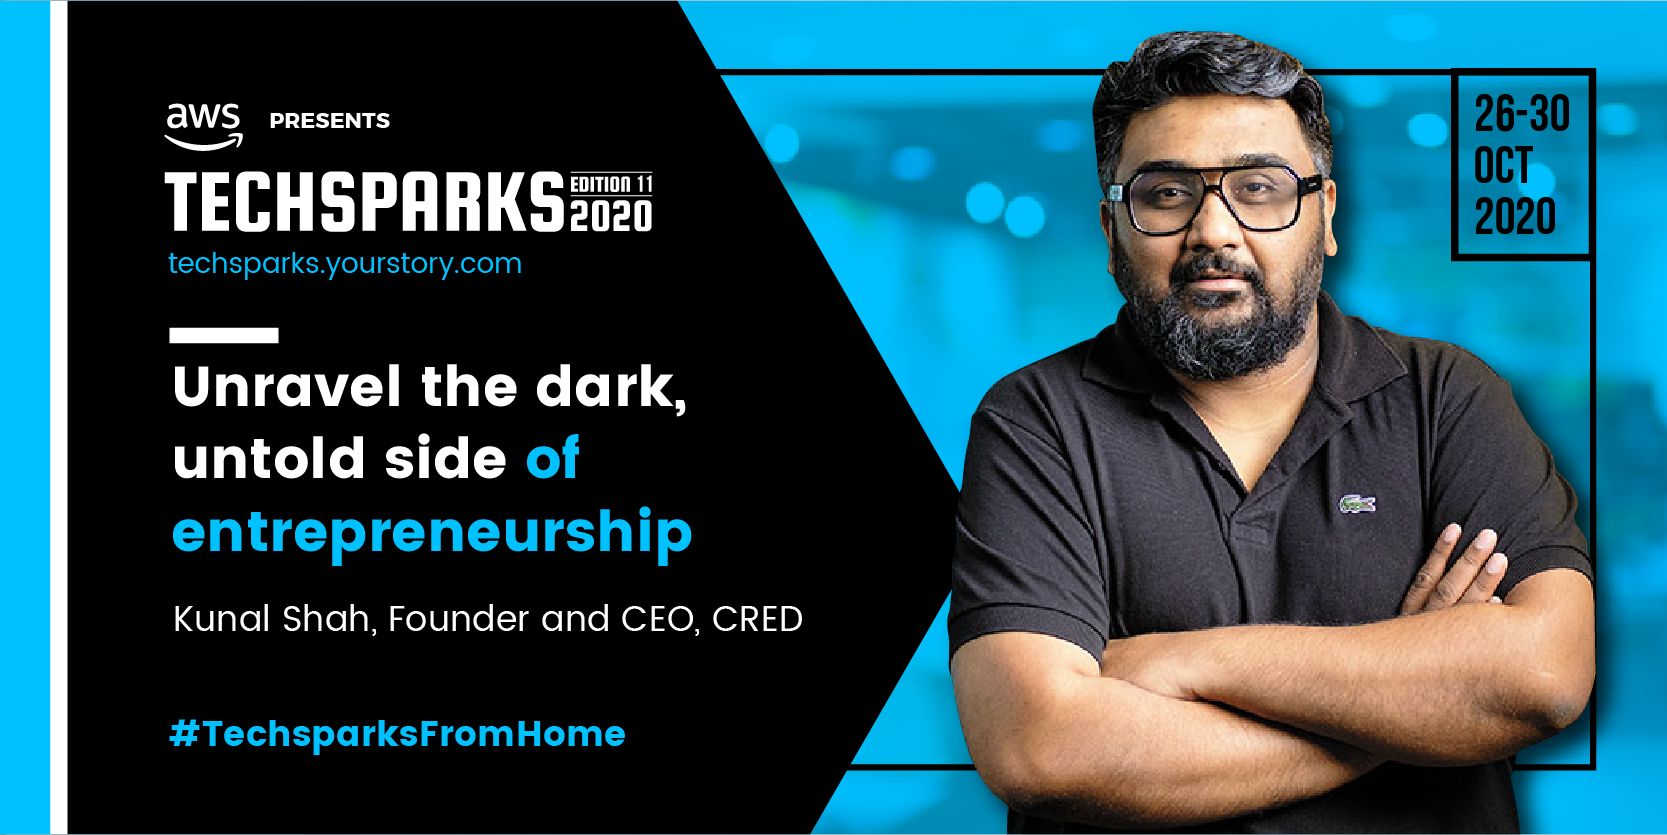 Unravel the dark, untold side of entrepreneurship with Kunal Shah, only at TechSparks 2020
